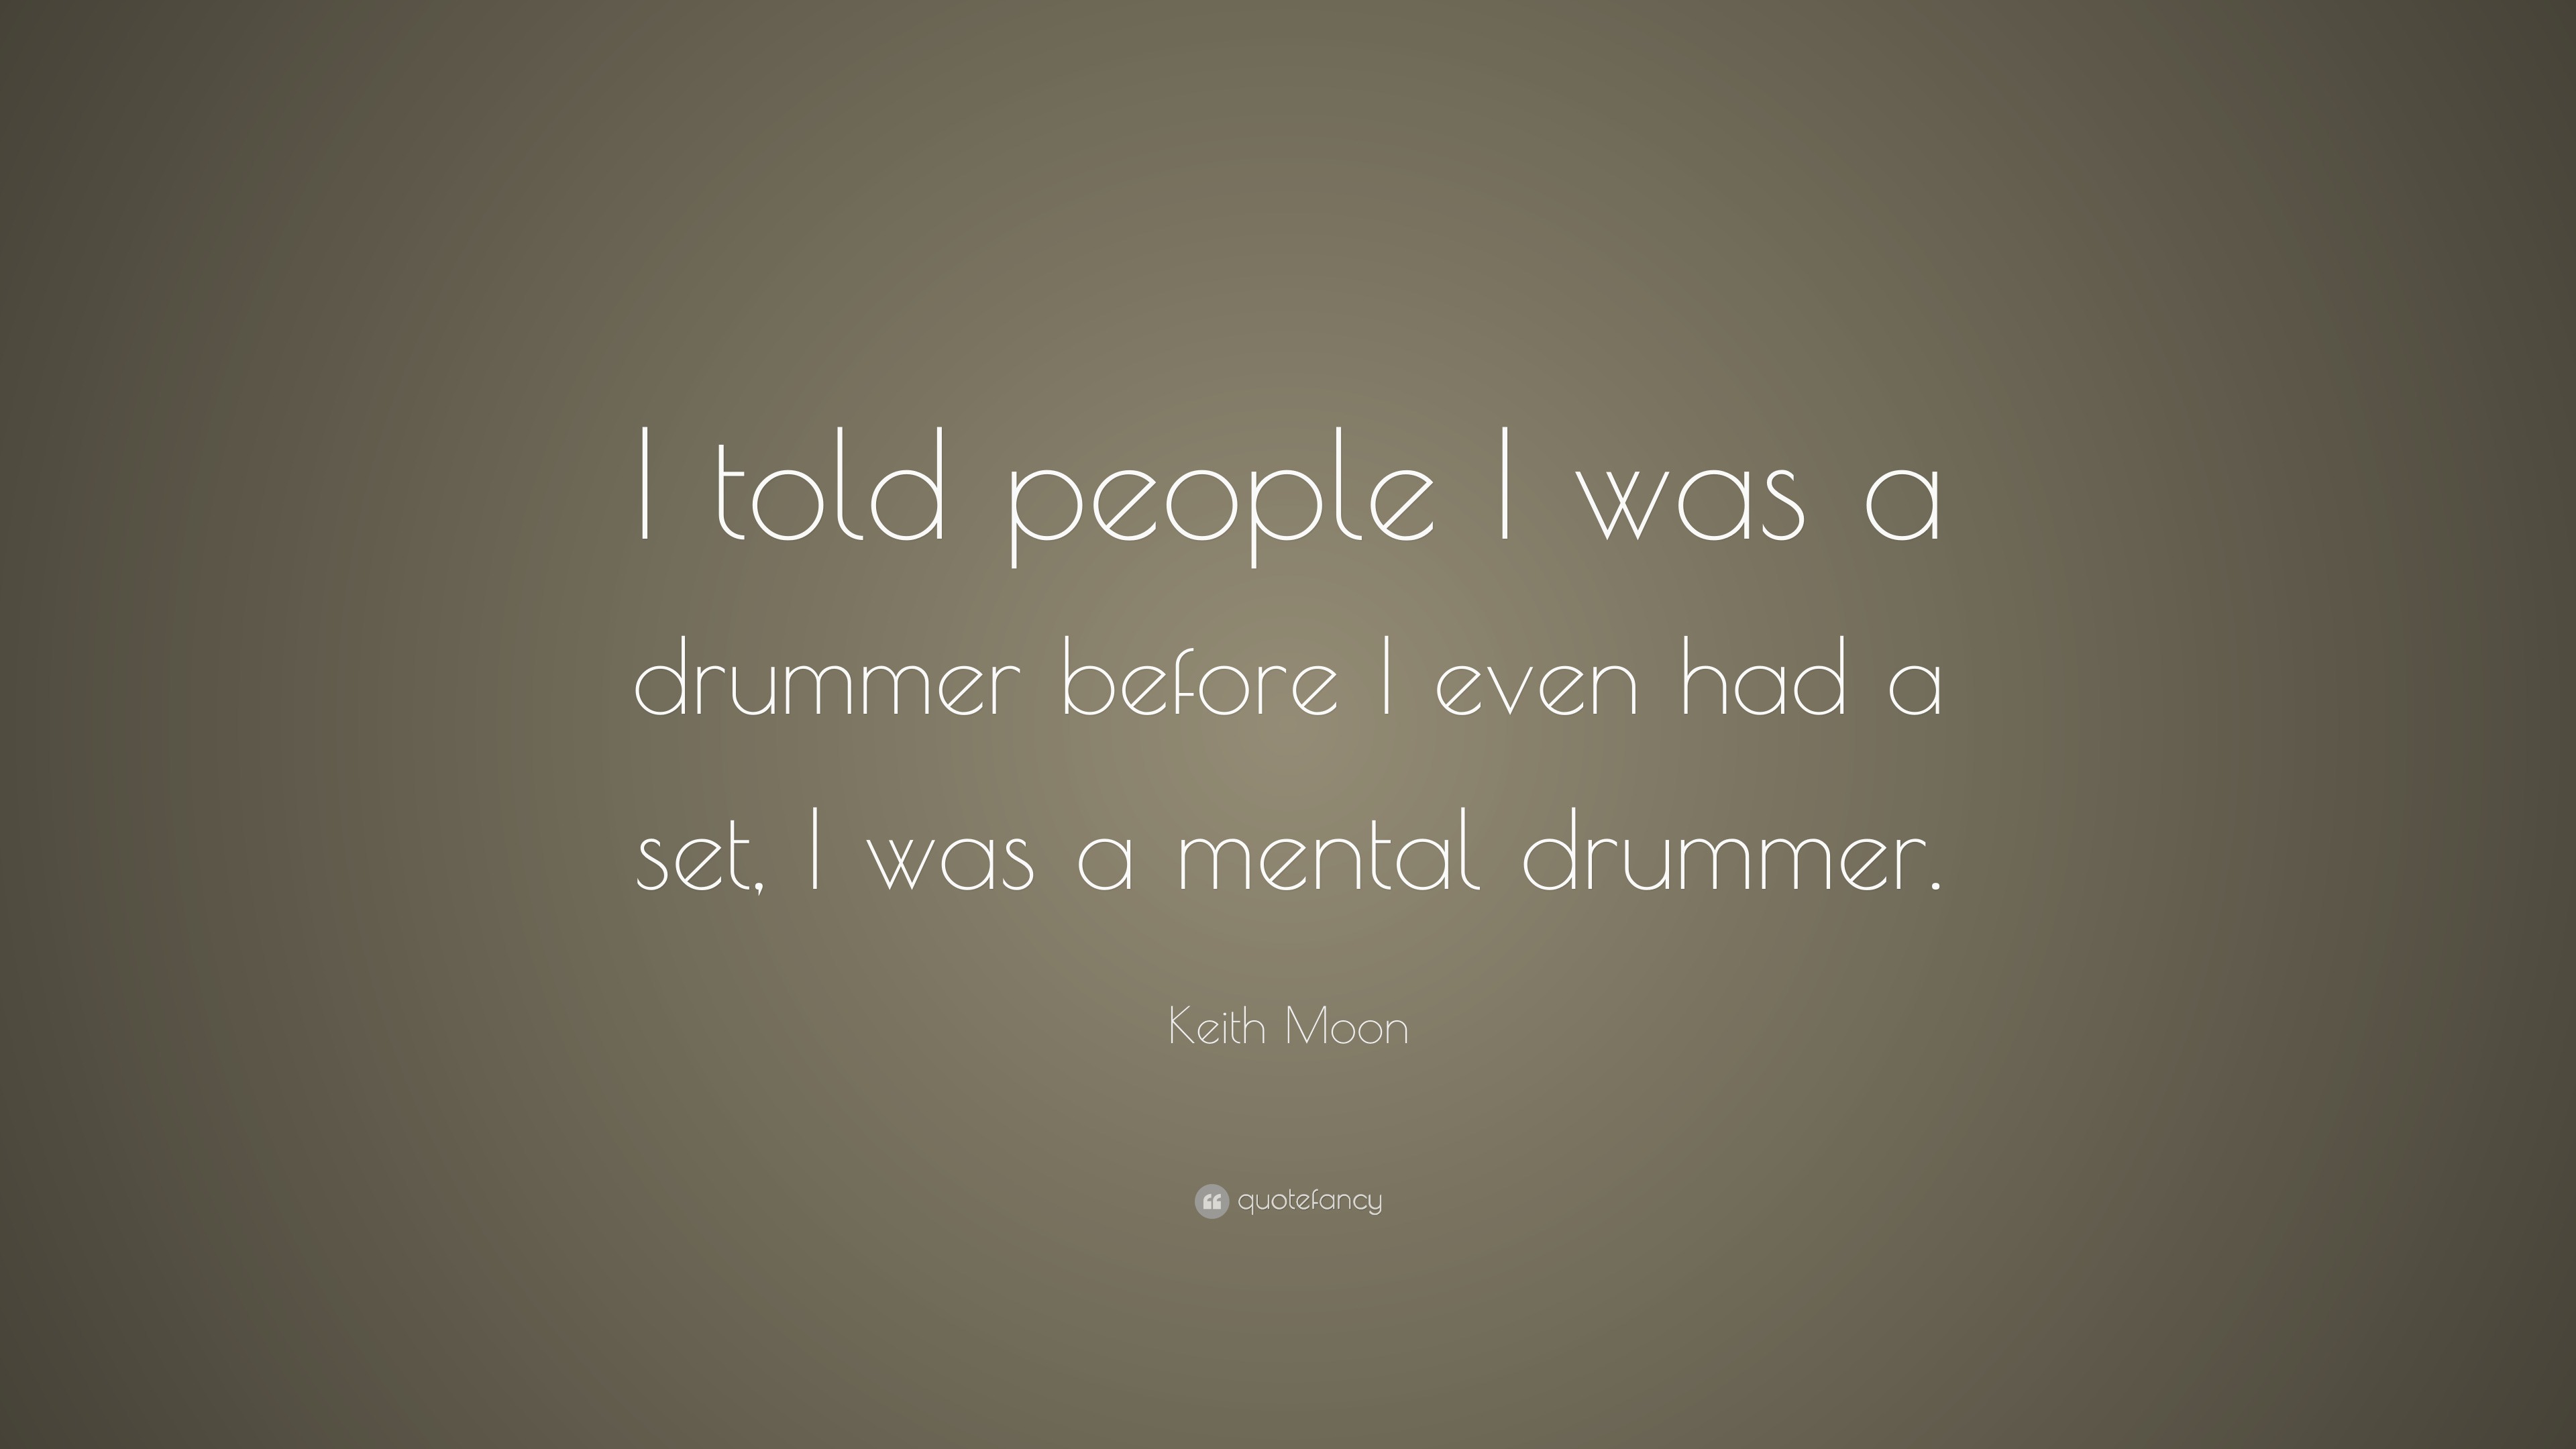 Keith Moon Quote: “I told people I was a drummer before I even had a ...